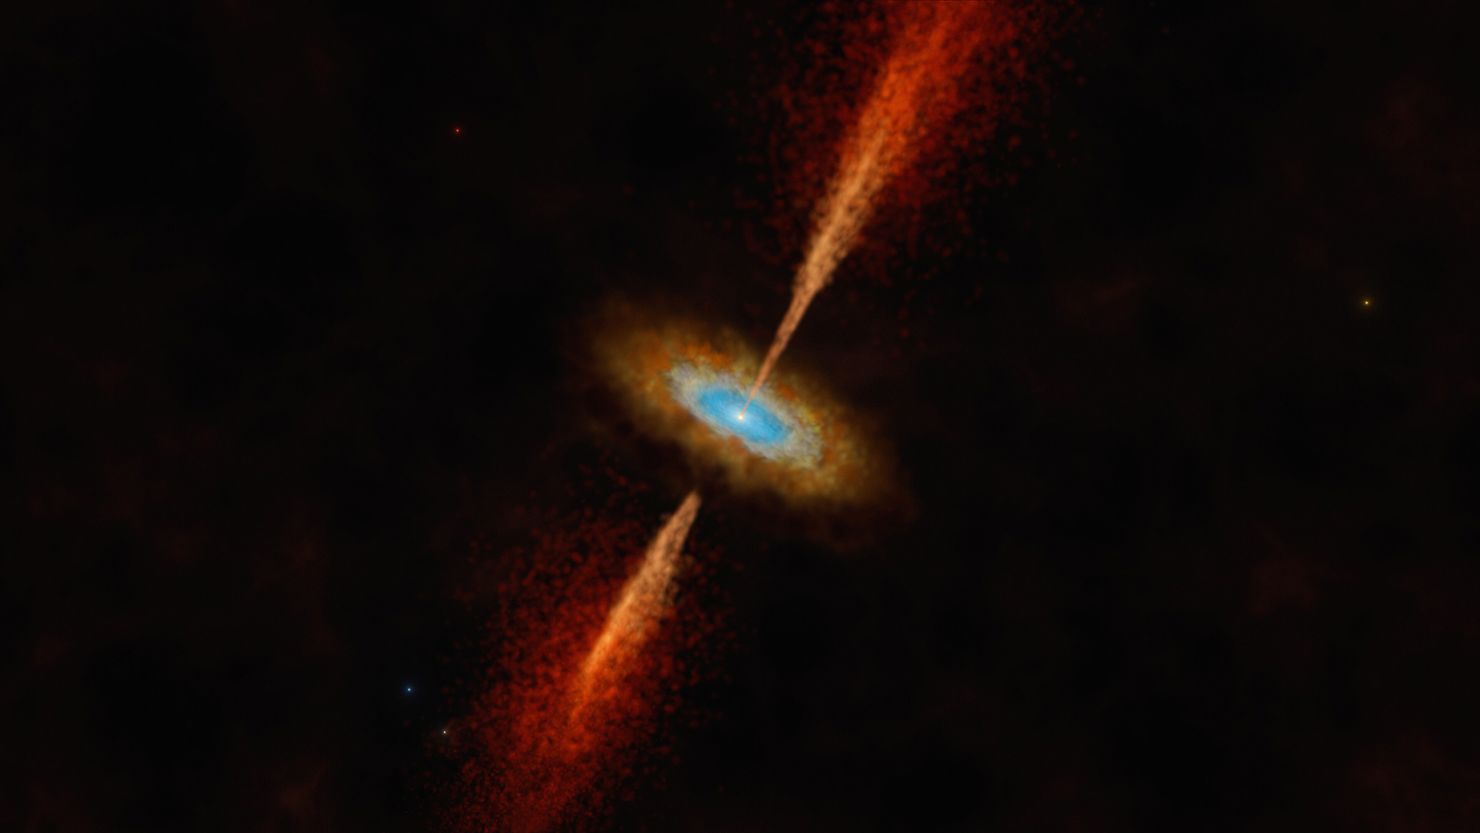 An artist's illustration depicts the HH 1177 system, located in a neighboring galaxy called the Large Magellanic Cloud. The massive young star at the center pulls in material from a rotating disk of gas and dust, but it also expels matter in the form of jets.